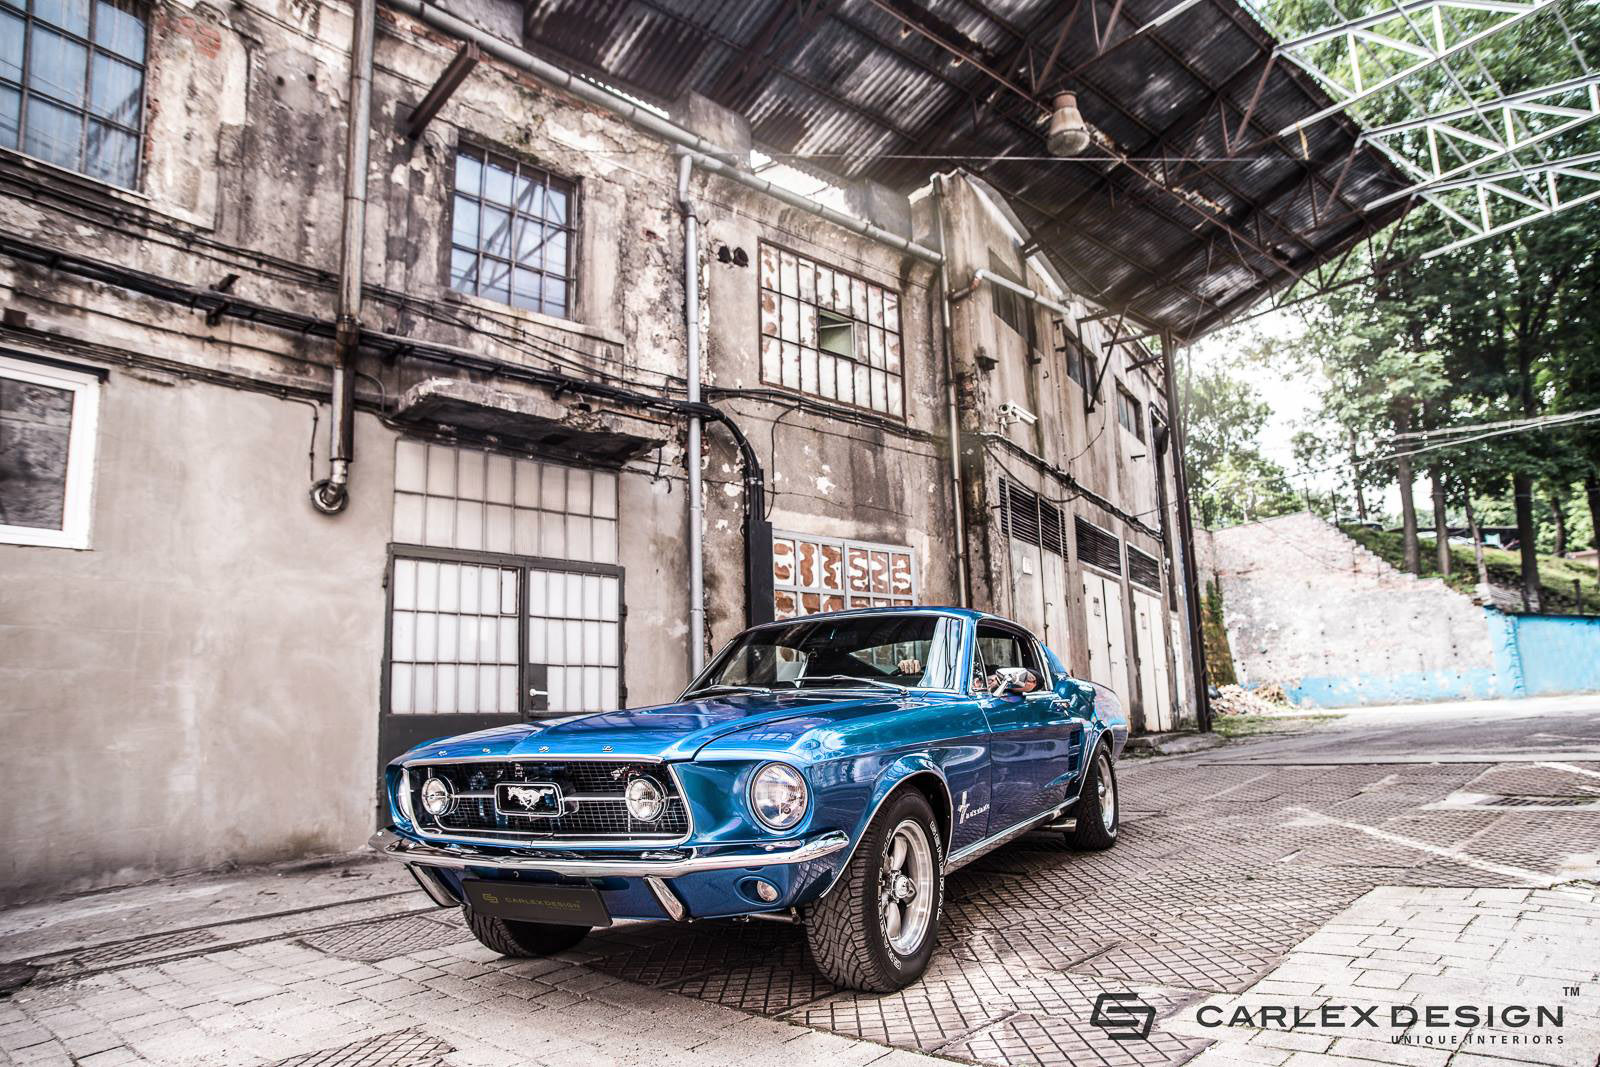 Ford Mustang Fastback by Carlex Design